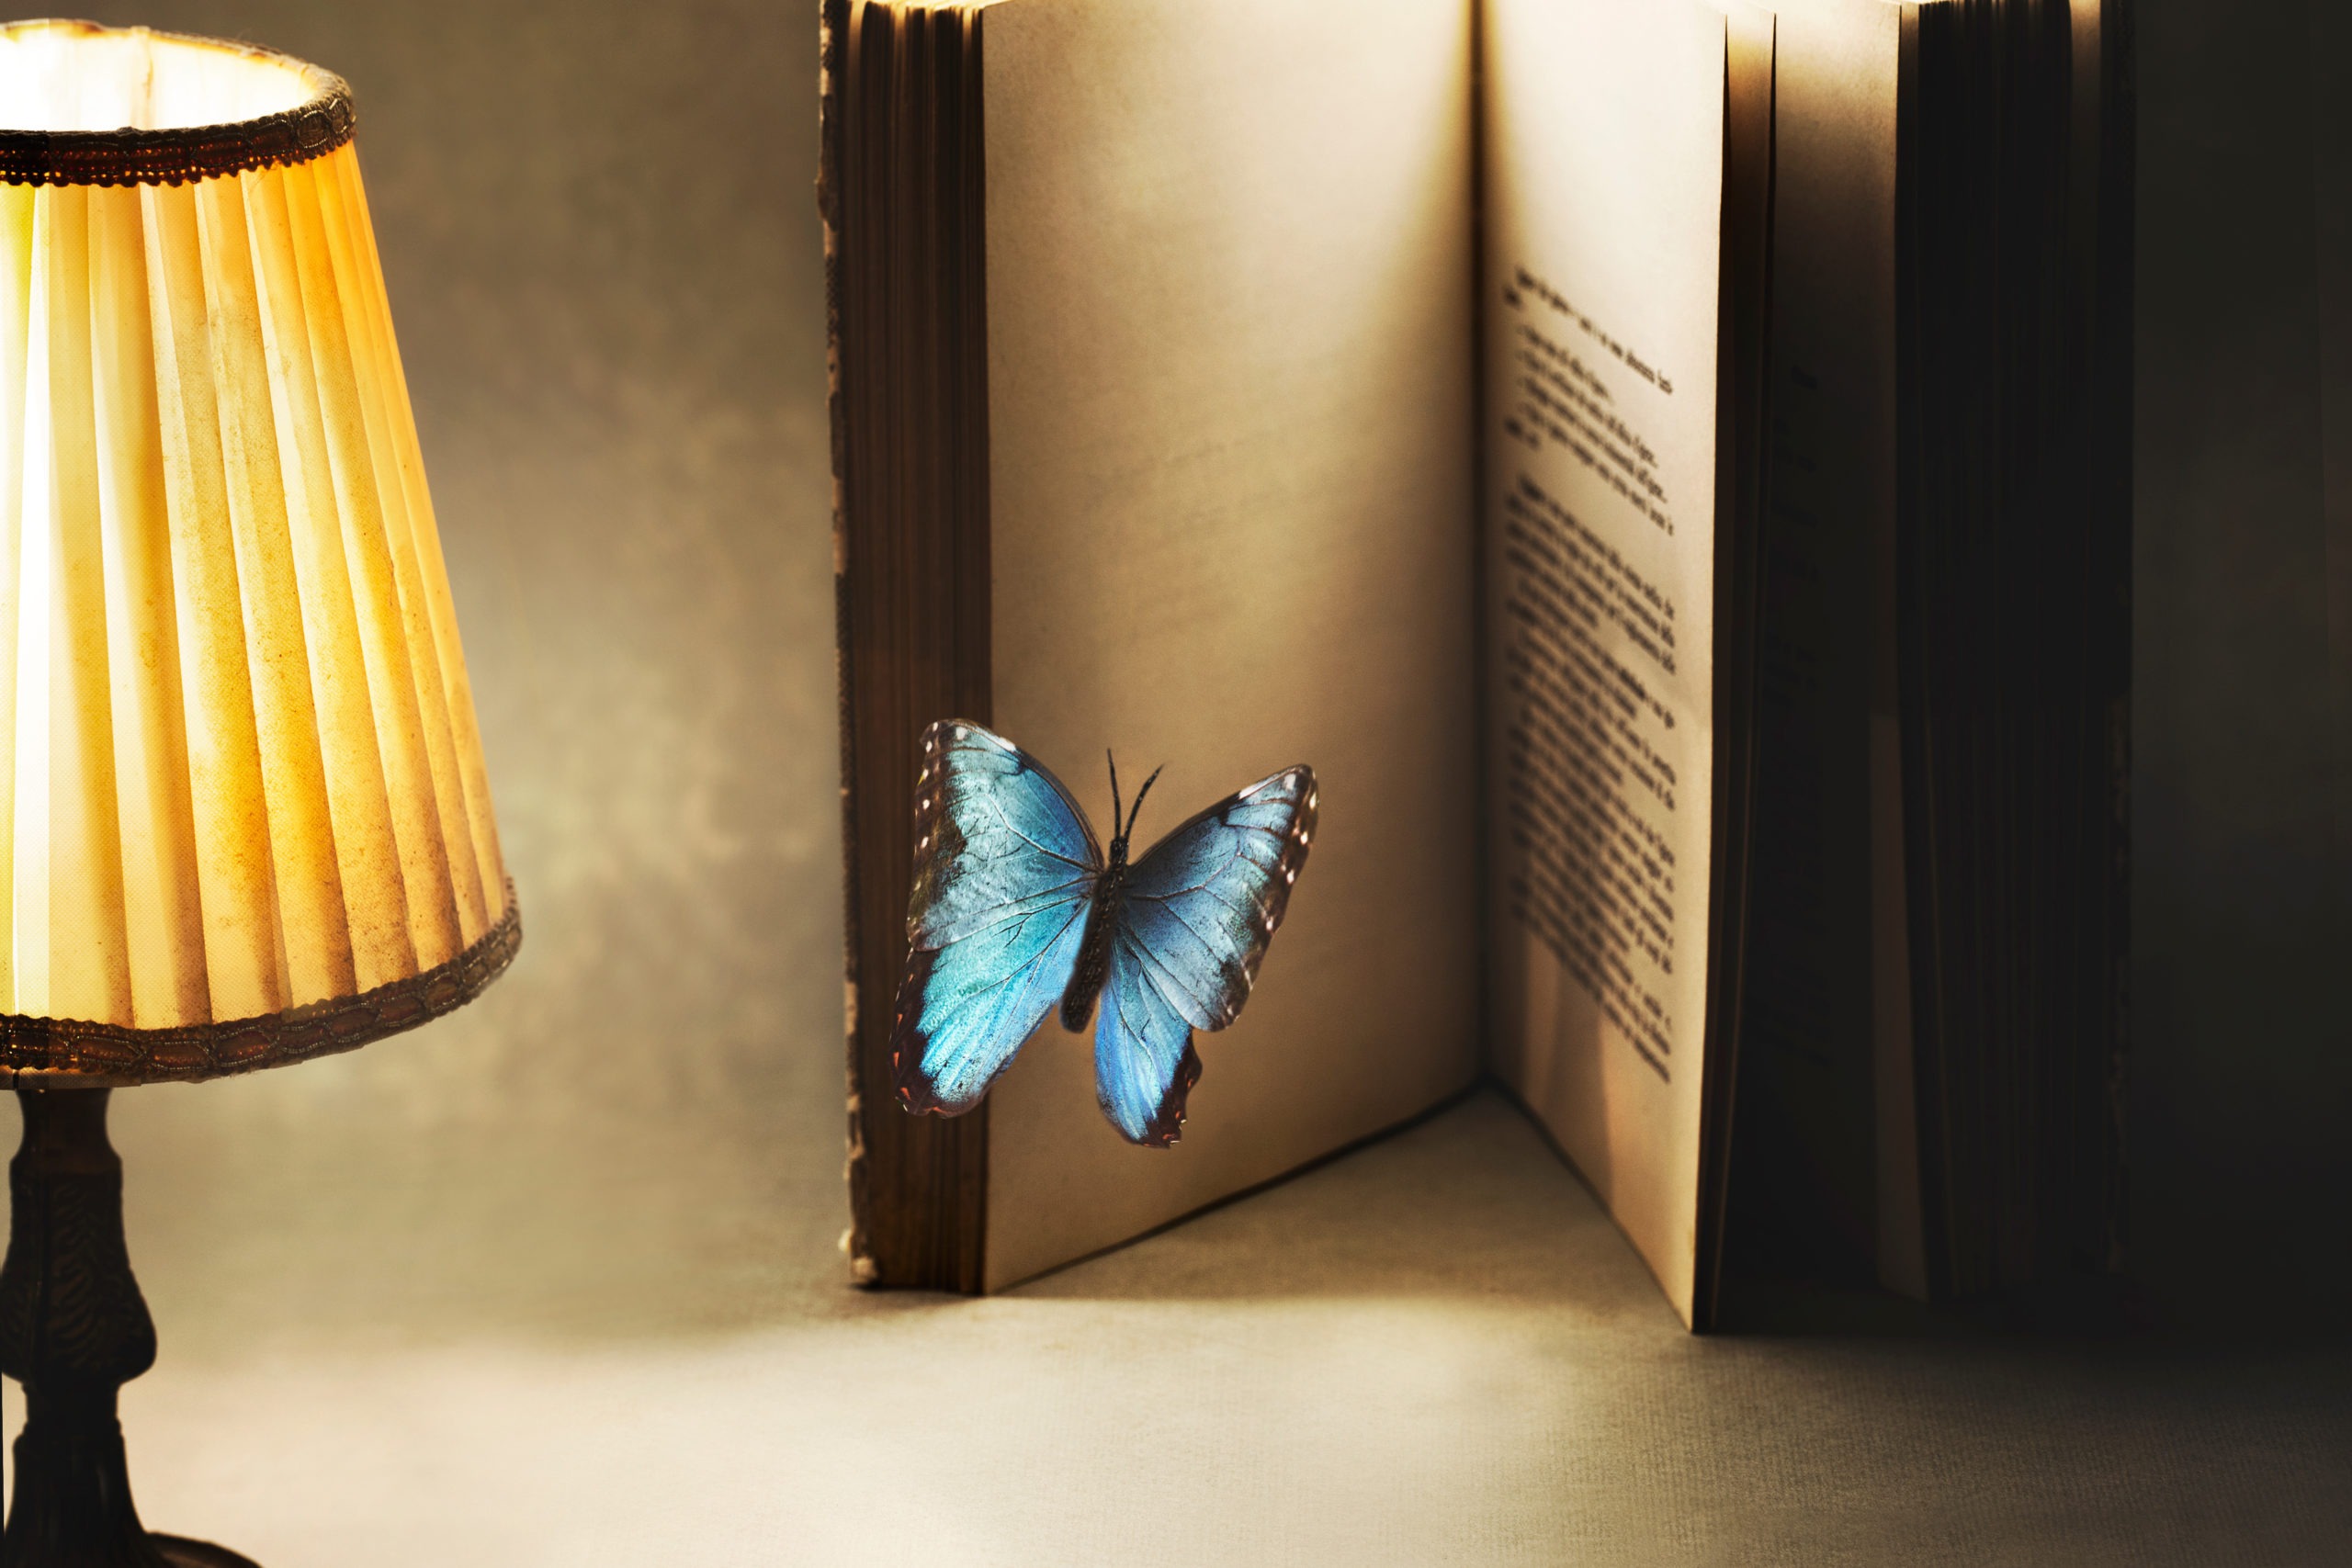 Surreal butterfly entering the pages of a book with a lit lamp beside it.